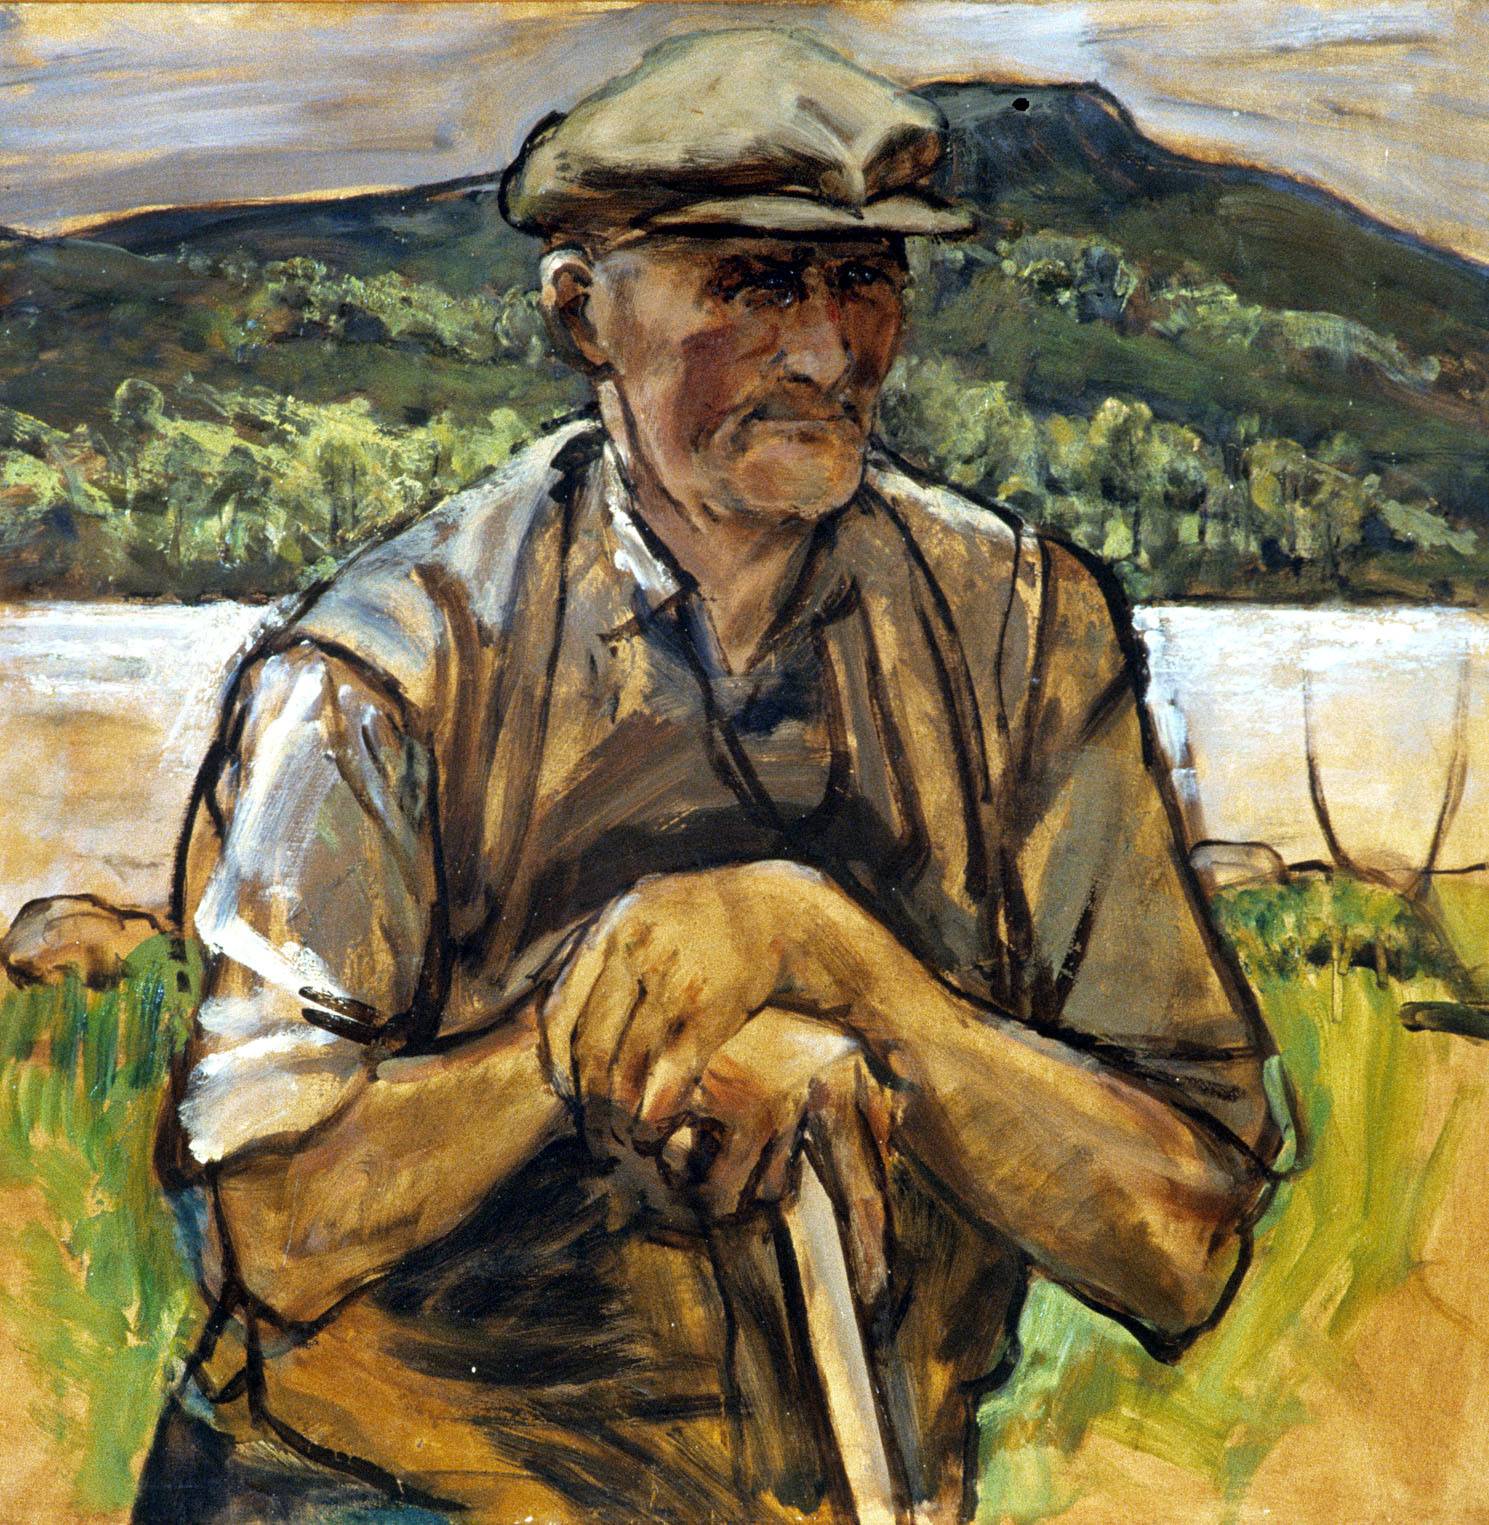 Eddie Moore, 1972, by Derek Hill. Eddie Moore, by Derek Hill, 1972. Oil on canvas. Eddie Moore was the gardener at St Columb's for many years. He died in 1983. Derek Hill Foundation. 